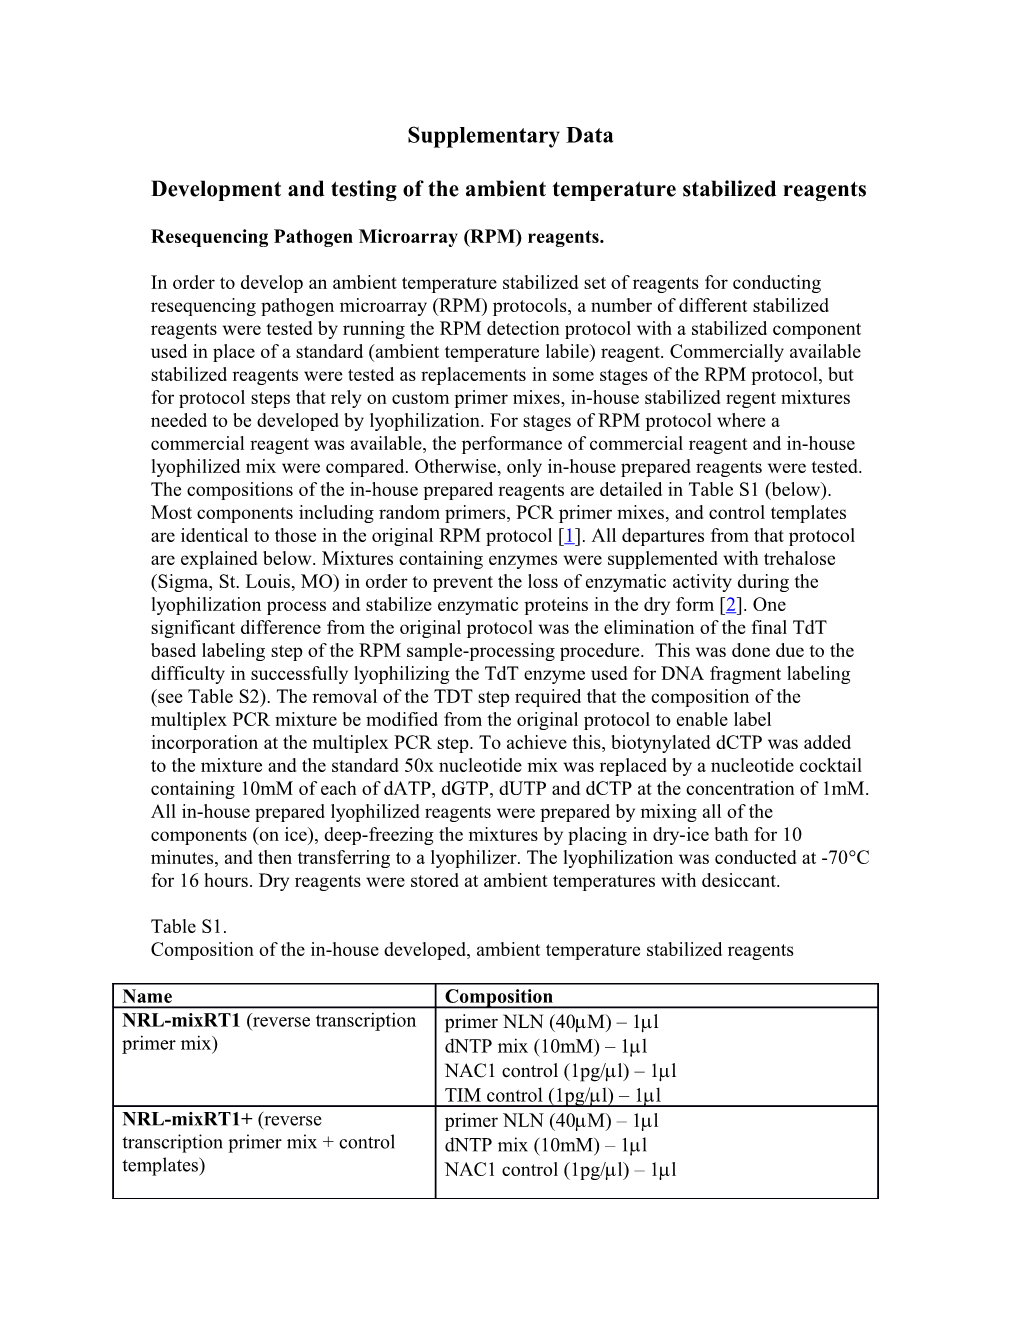 Development and Testing of the Ambient Temperature Stabilized Reagents